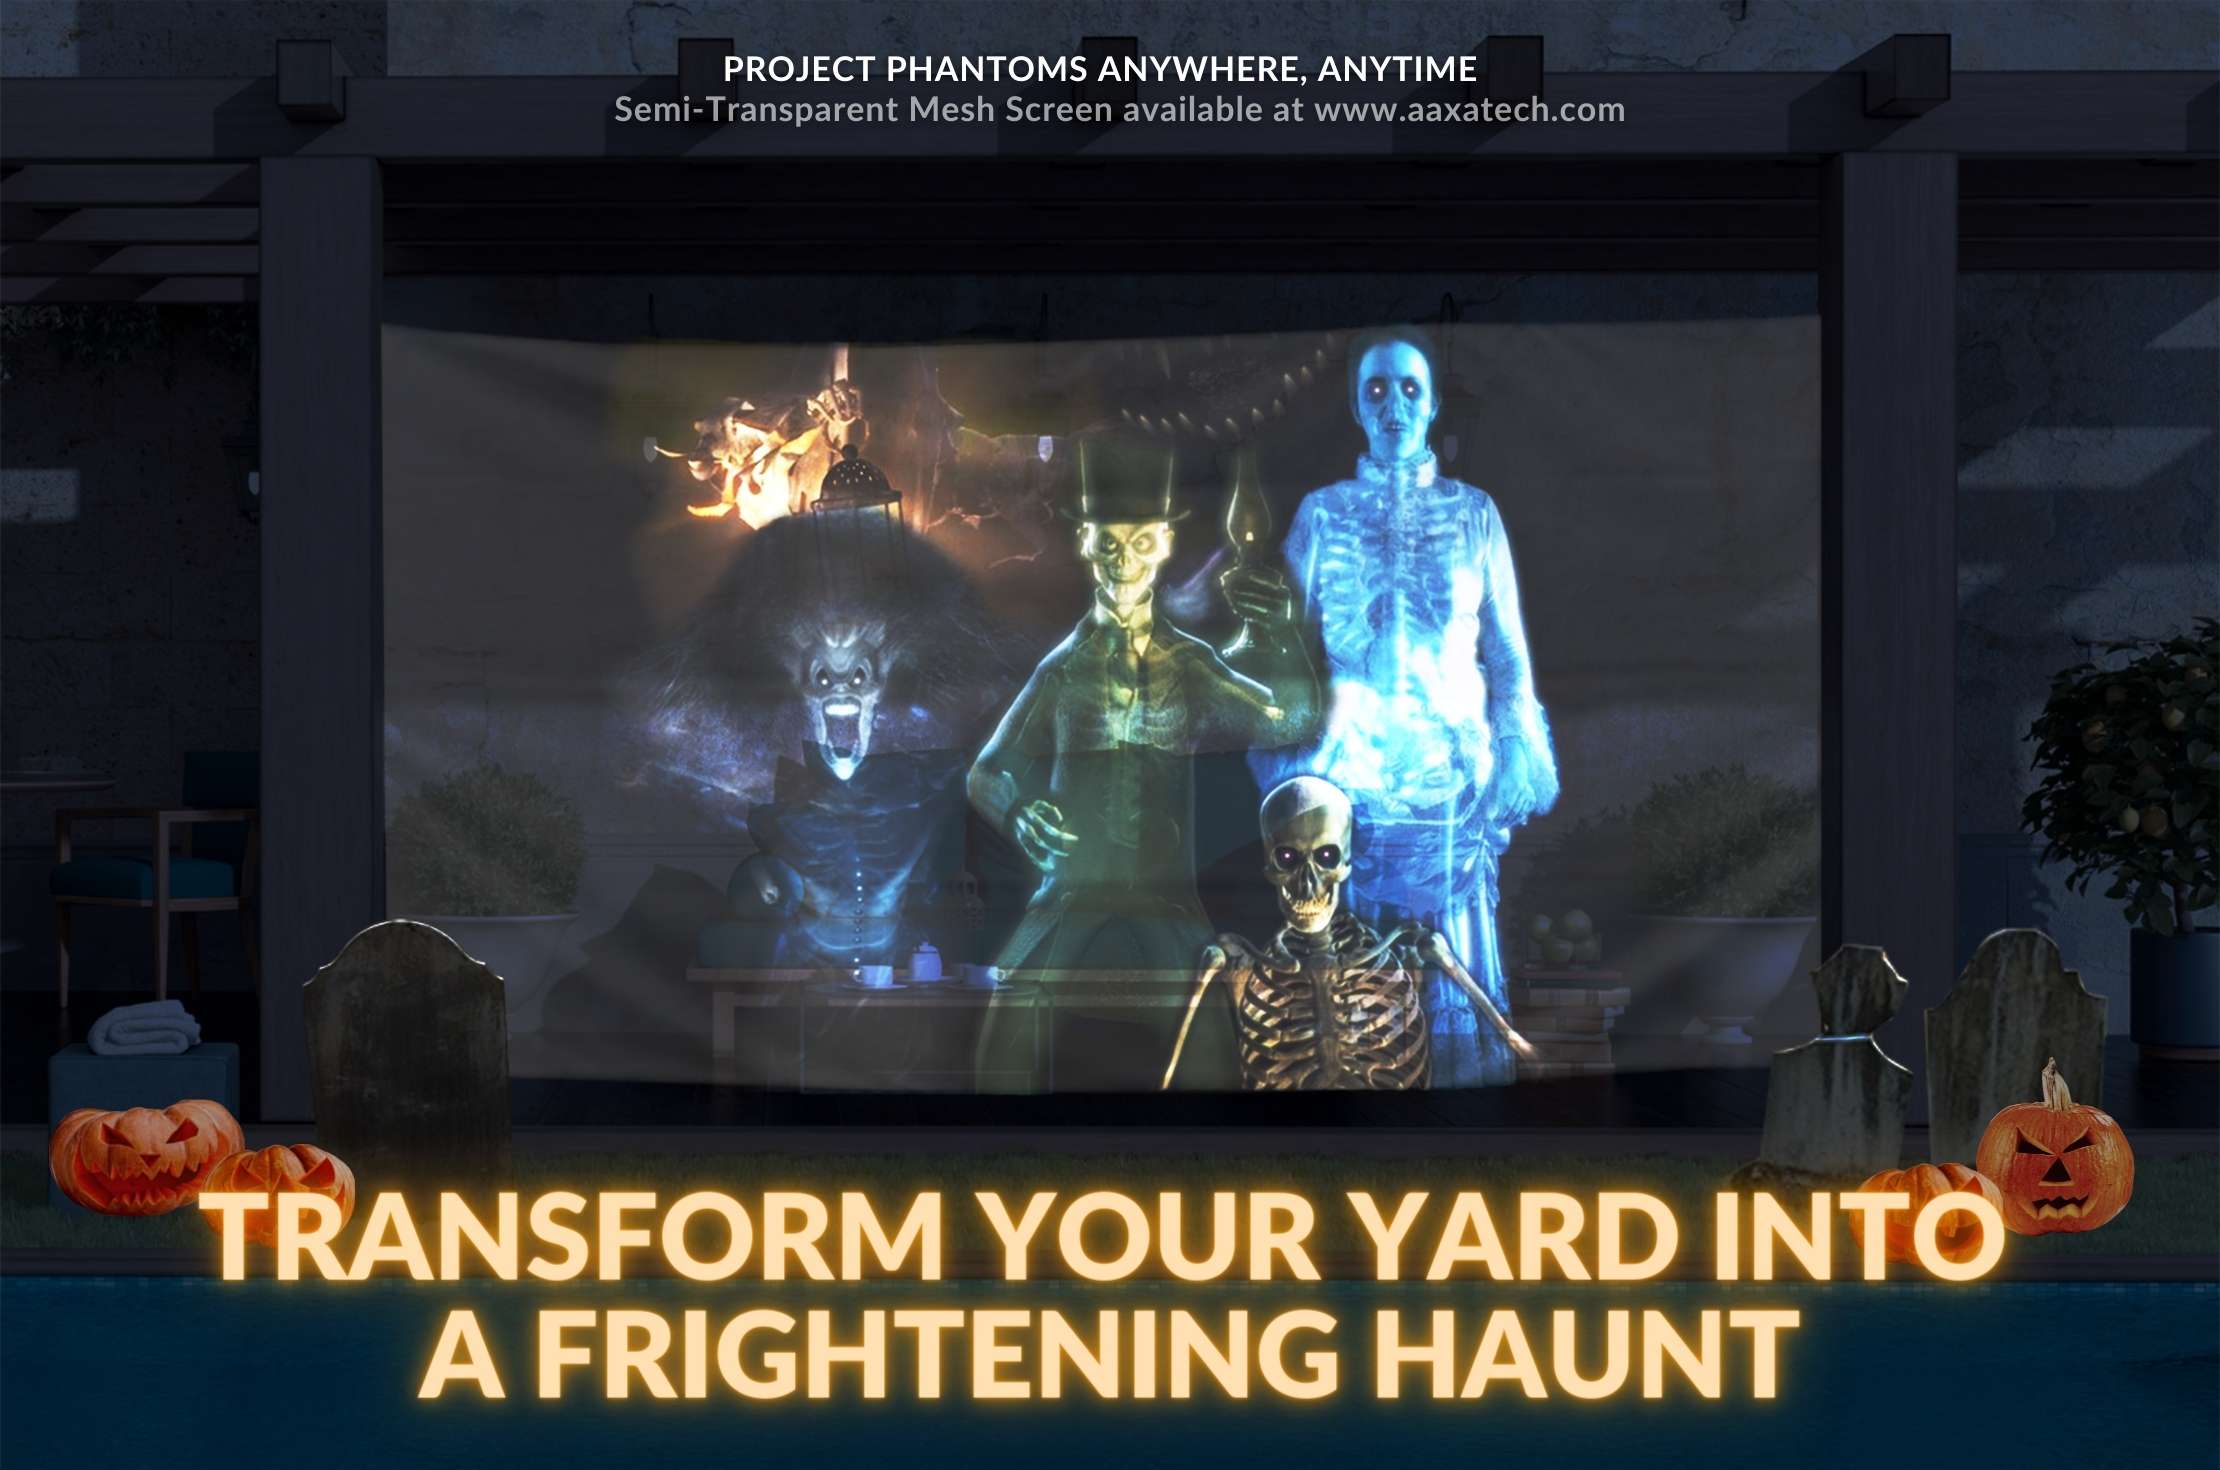 AAXA's Semi-Transparent Mesh Screen with ghosts, phantoms projected on it on front porch.